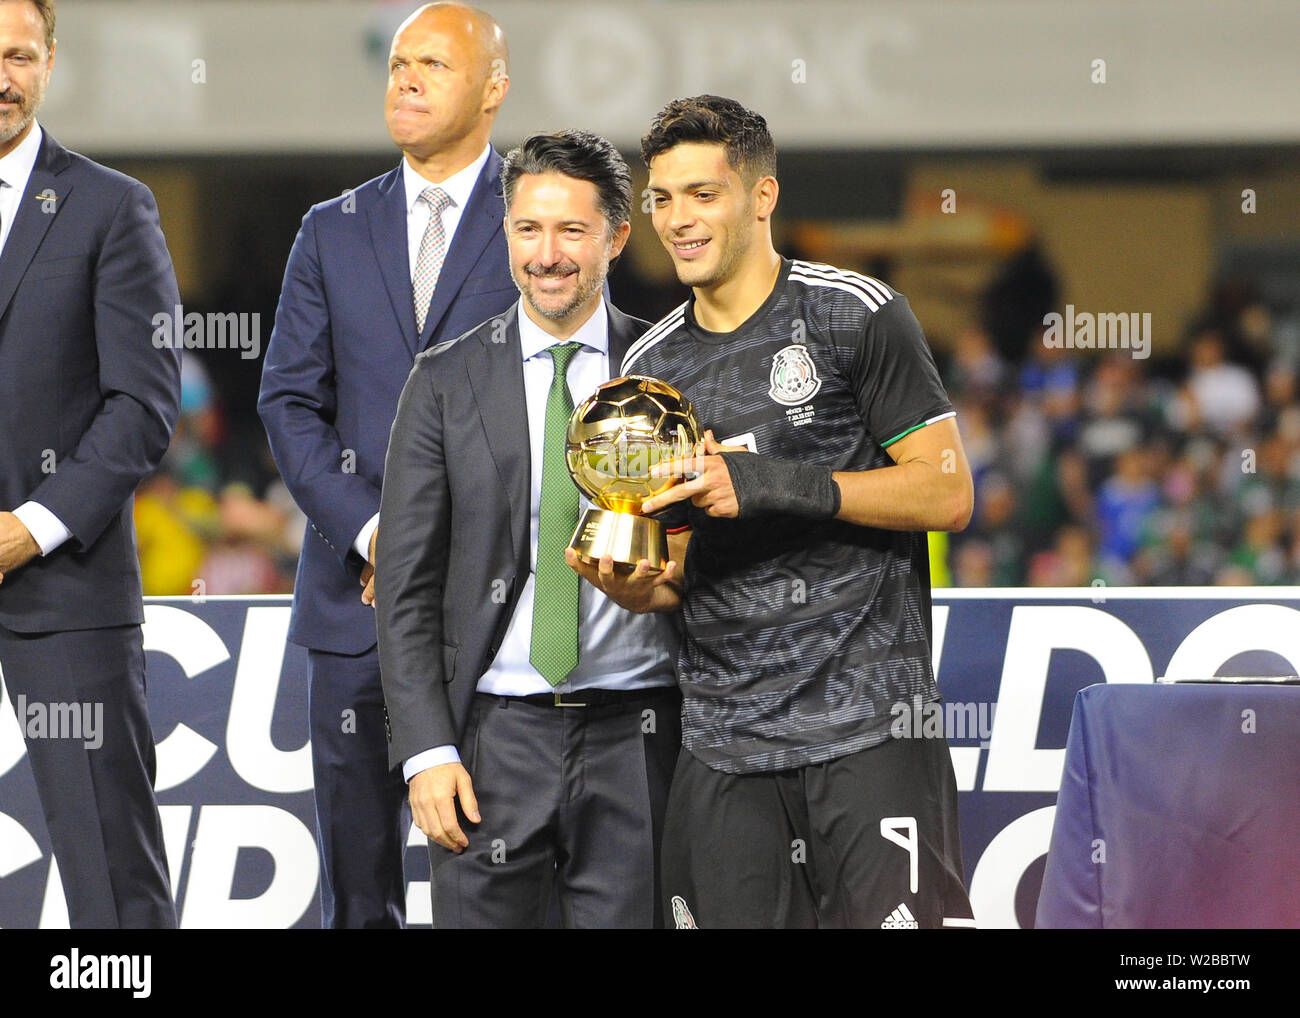 Chicago, IL, USA. 07th July, 2019. Mexico forward, Raul Jimenez (9), receives an award after the 2019 CONCACAF Gold Cup, championship match, between the United States and Mexico, at Soldier Field in Chicago, IL. Credit: Kevin Langley/CSM/Alamy Live News Stock Photo